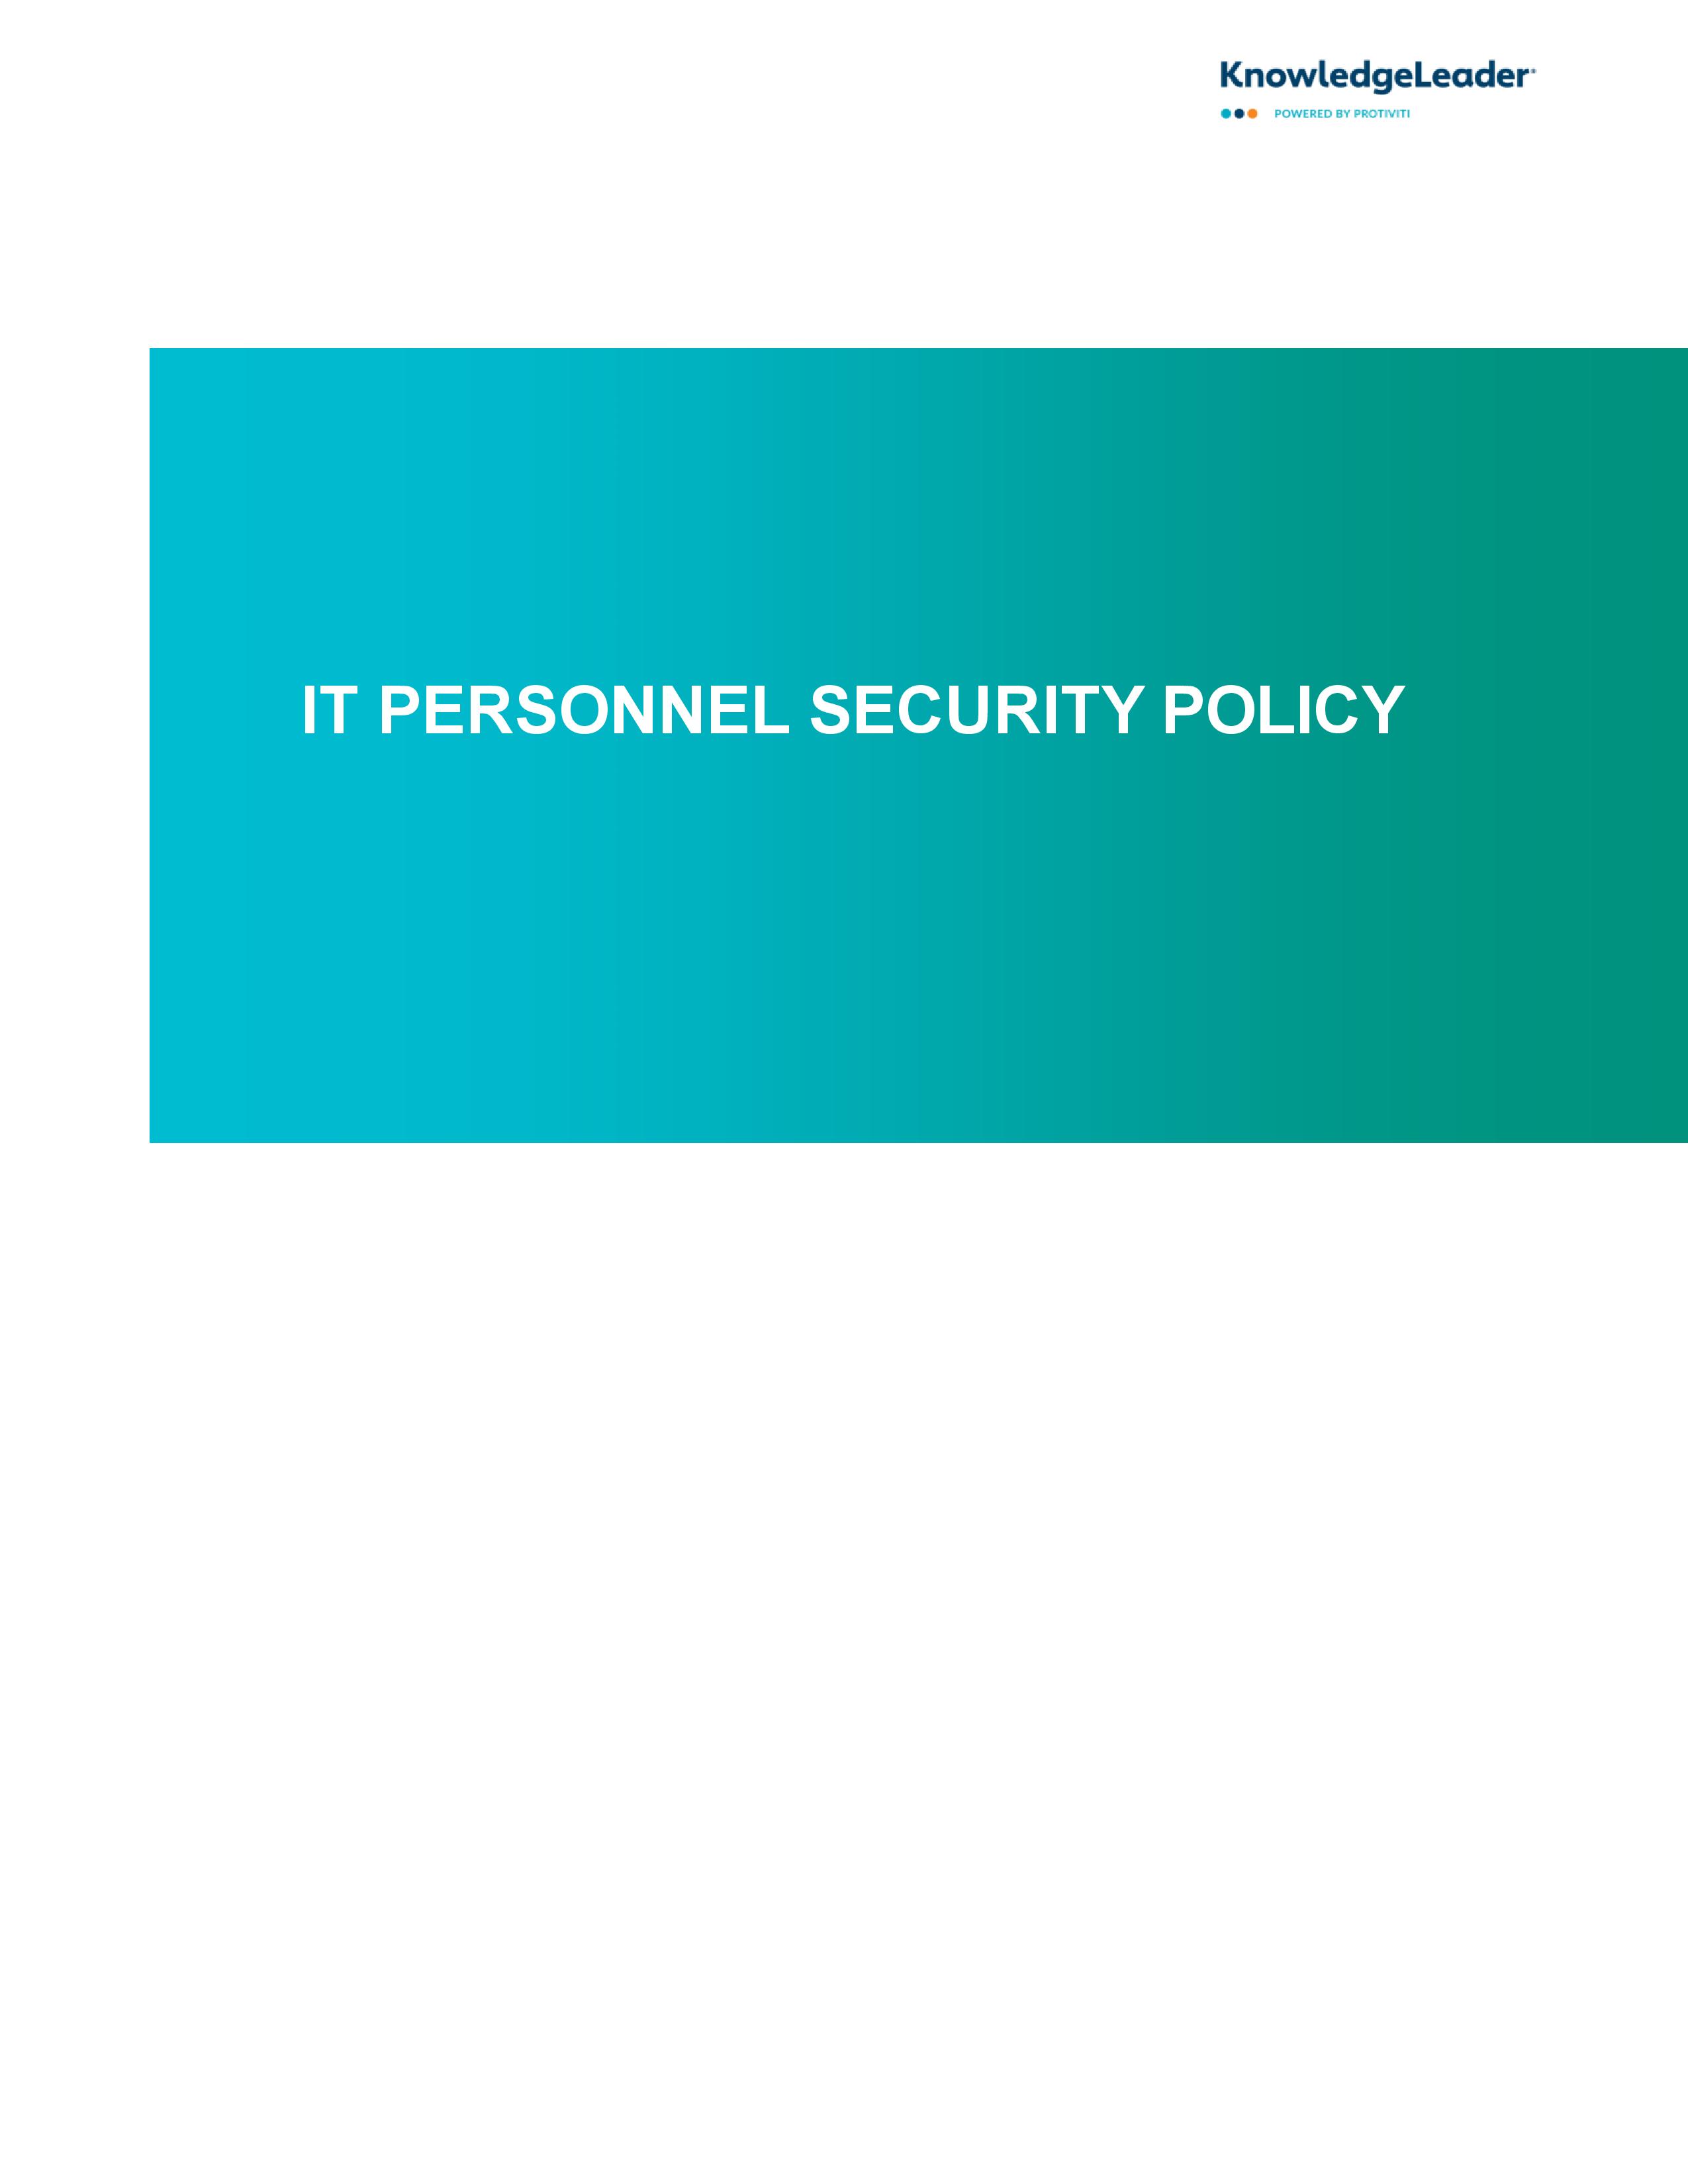 Screenshot of the first page of IT Personnel Security Policy